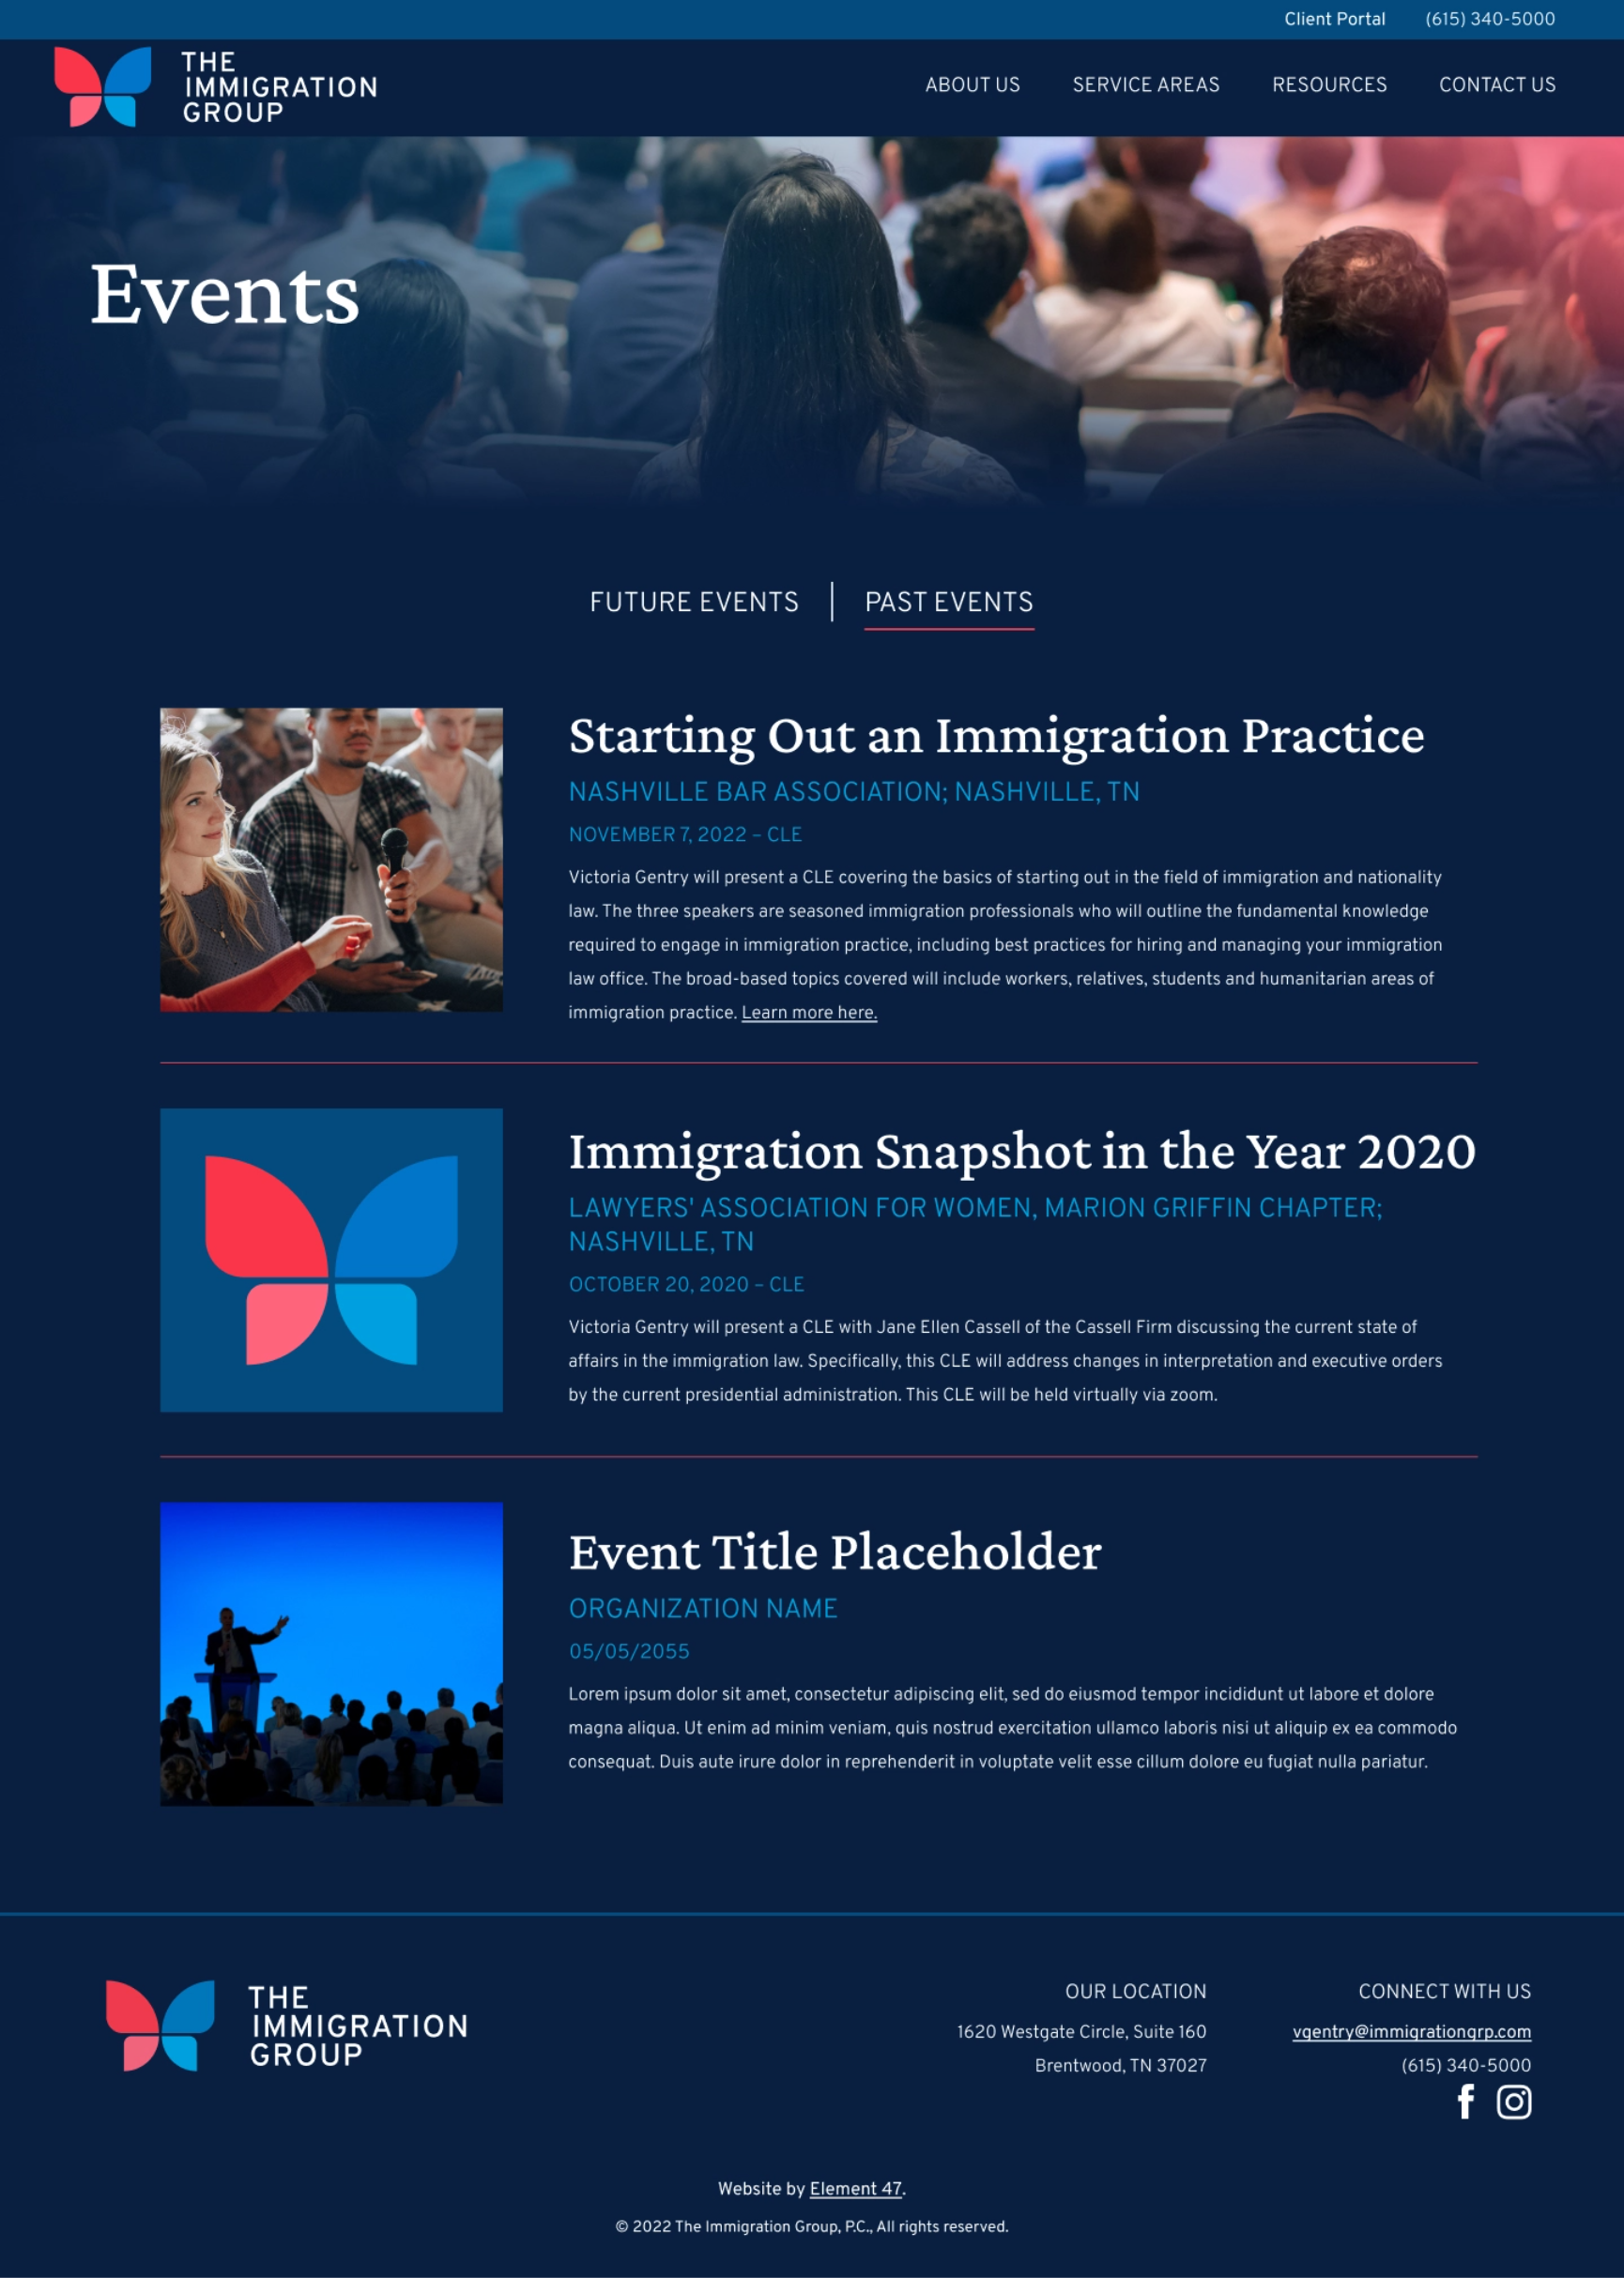 The Immigration Group events page design